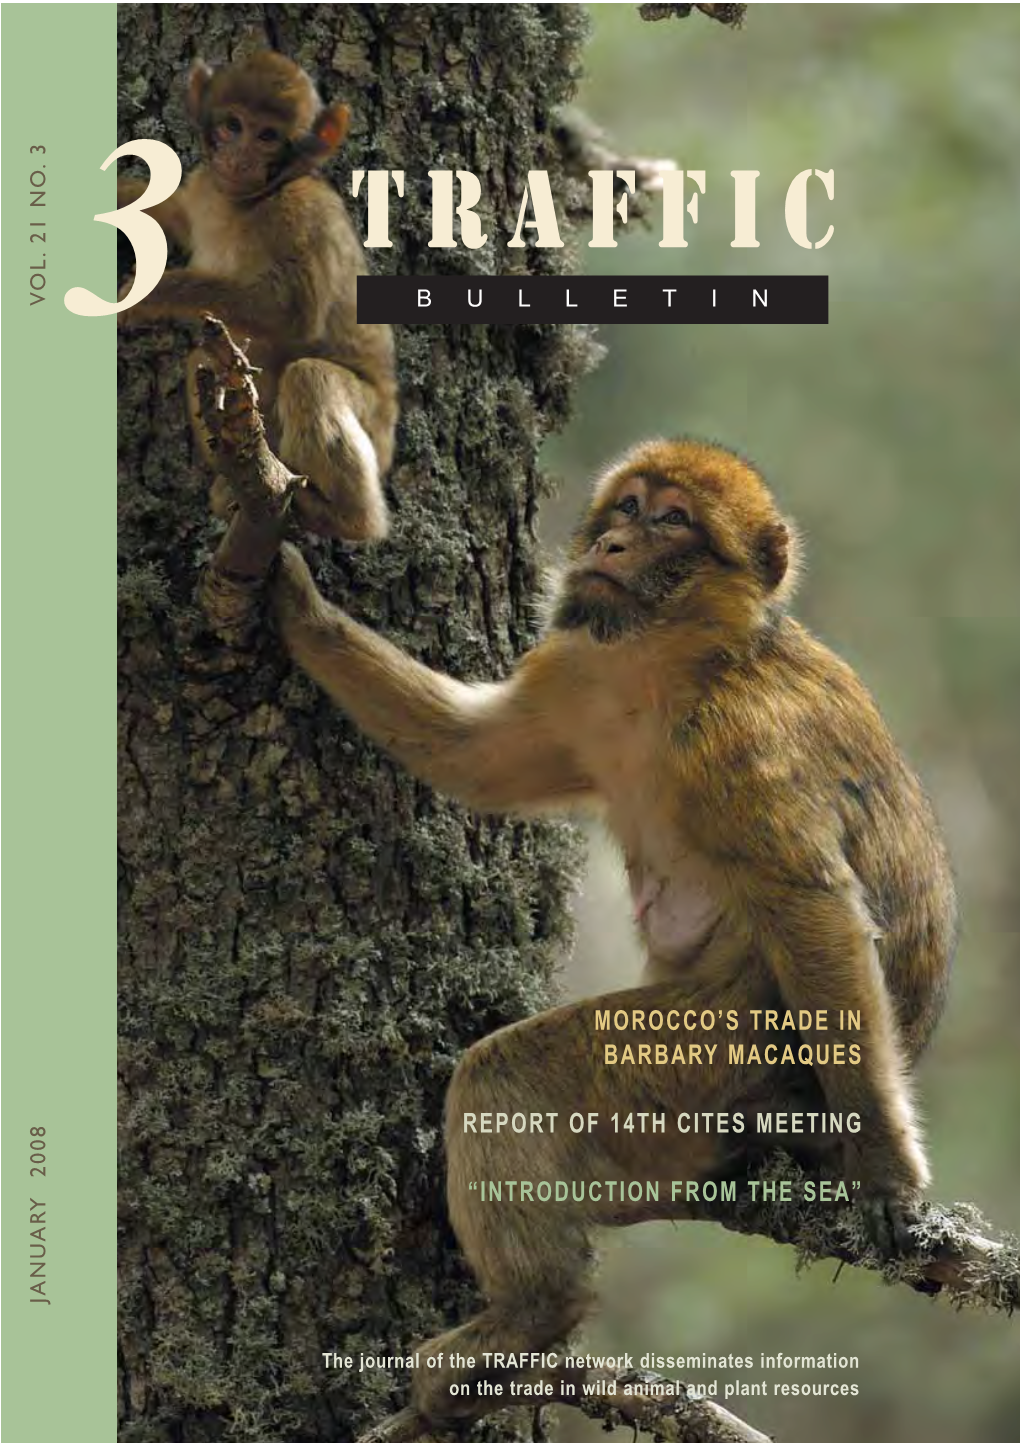 TRAFFIC BULLETIN REPORT OF14THCITESMEETING on the Tradeinwild Animaland Plantresources “INTRODUCTION FROMTHESEA” MOROCCO’S TRADEIN ABR MACAQUES BARBARY